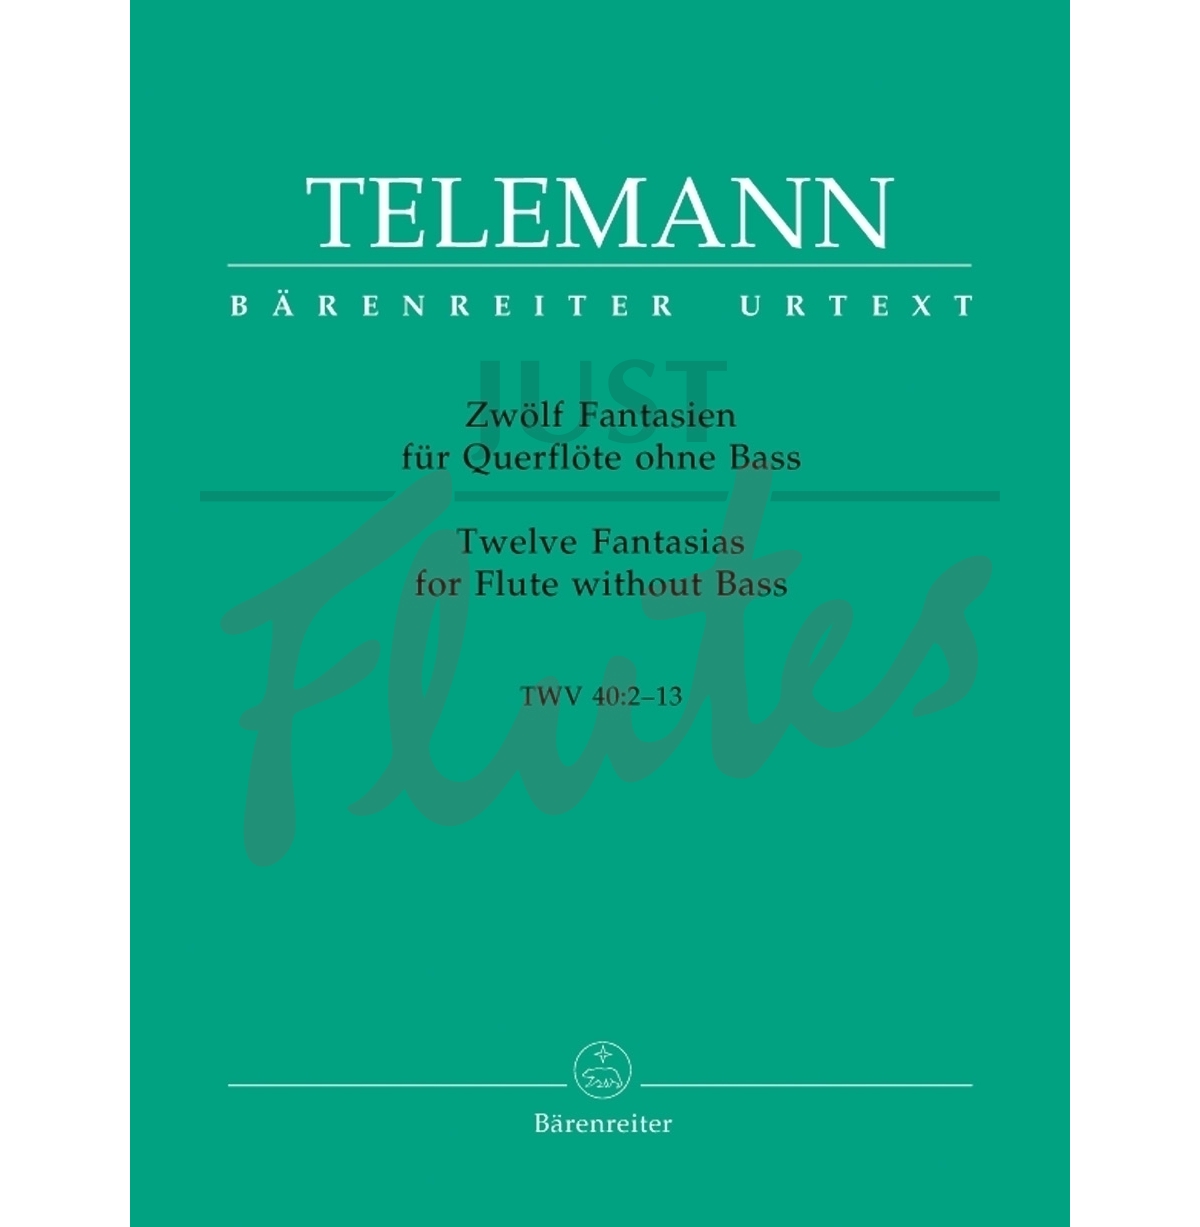 Twelve Fantasias for Flute without Bass